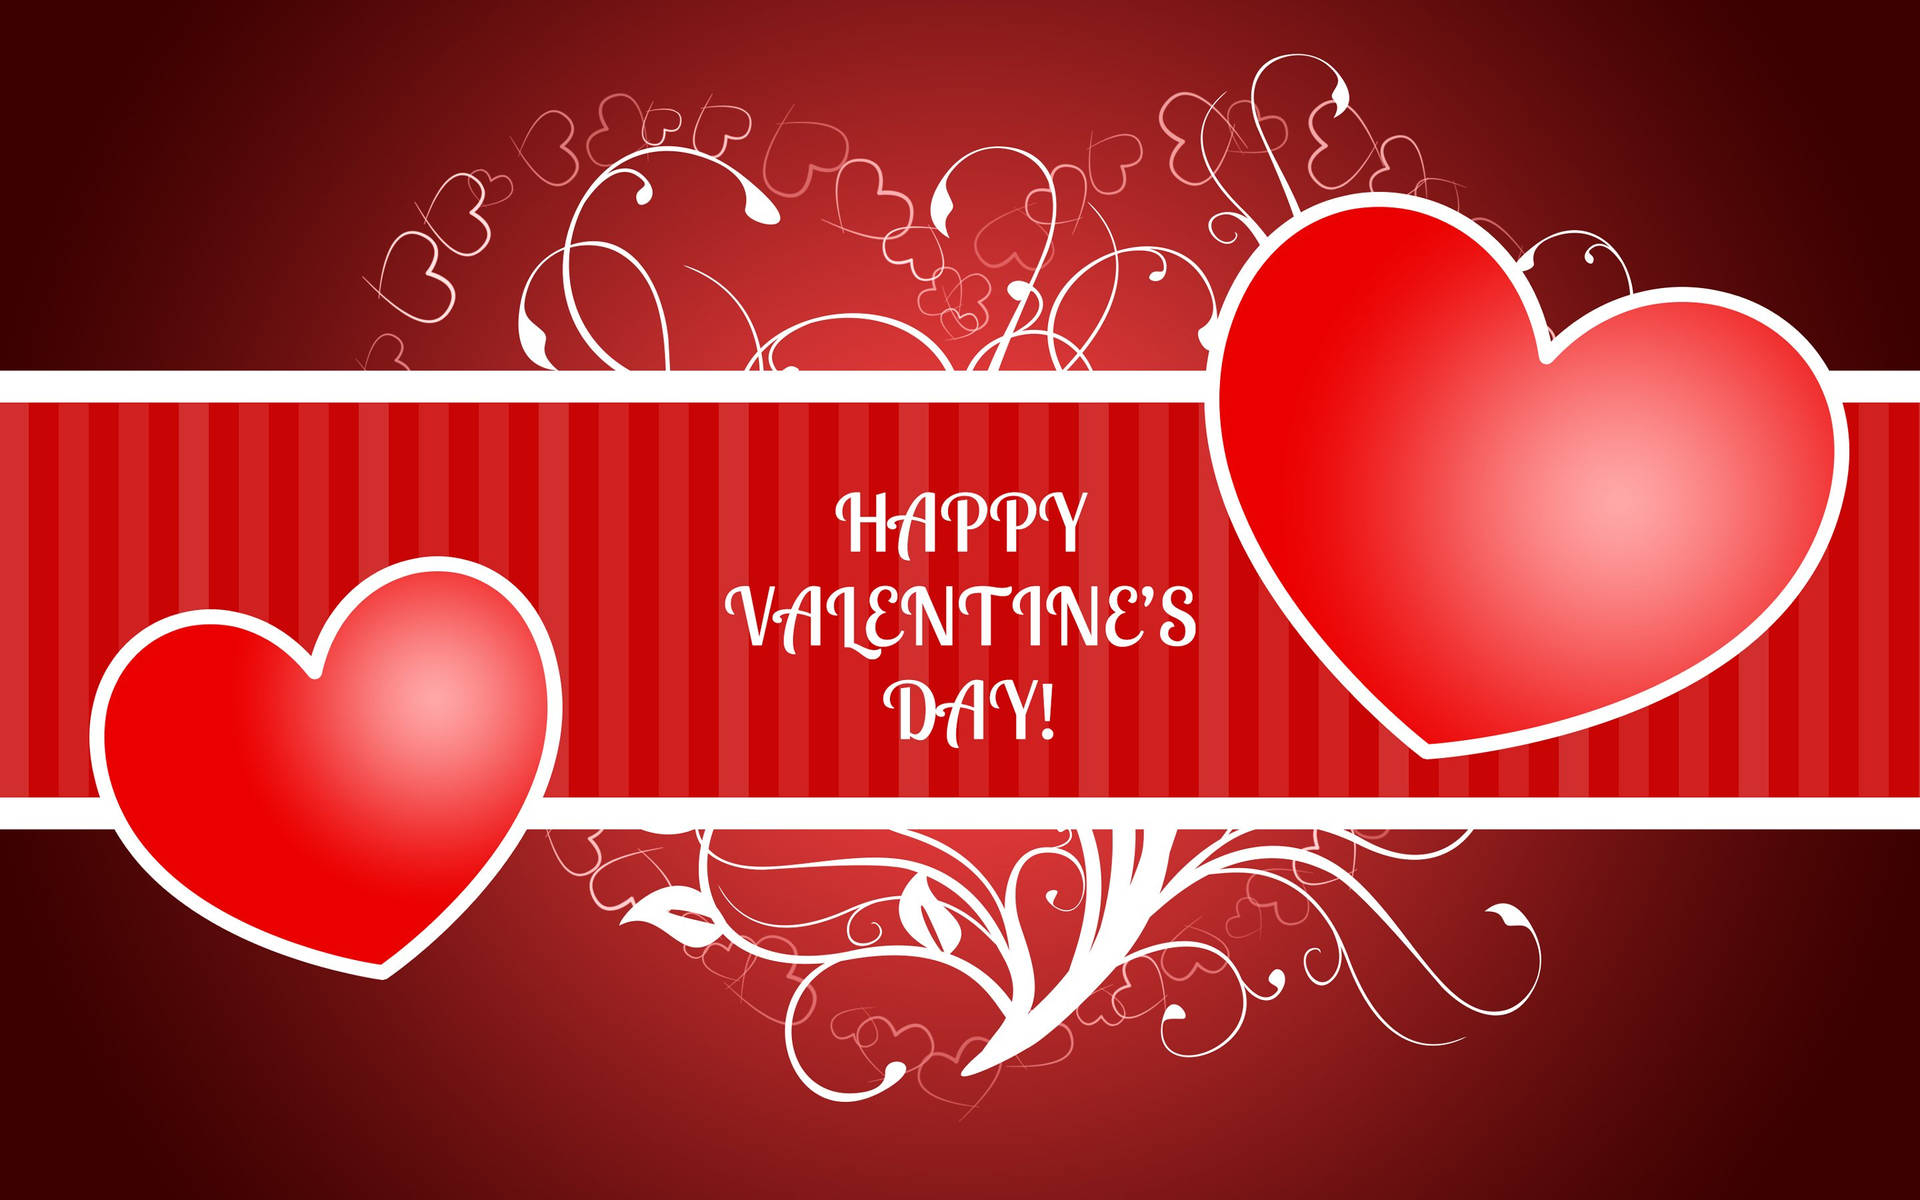 1920x1200 Download Happy Valentine's Day With Two Red Hearts Wallpaper | Wallpapers .com